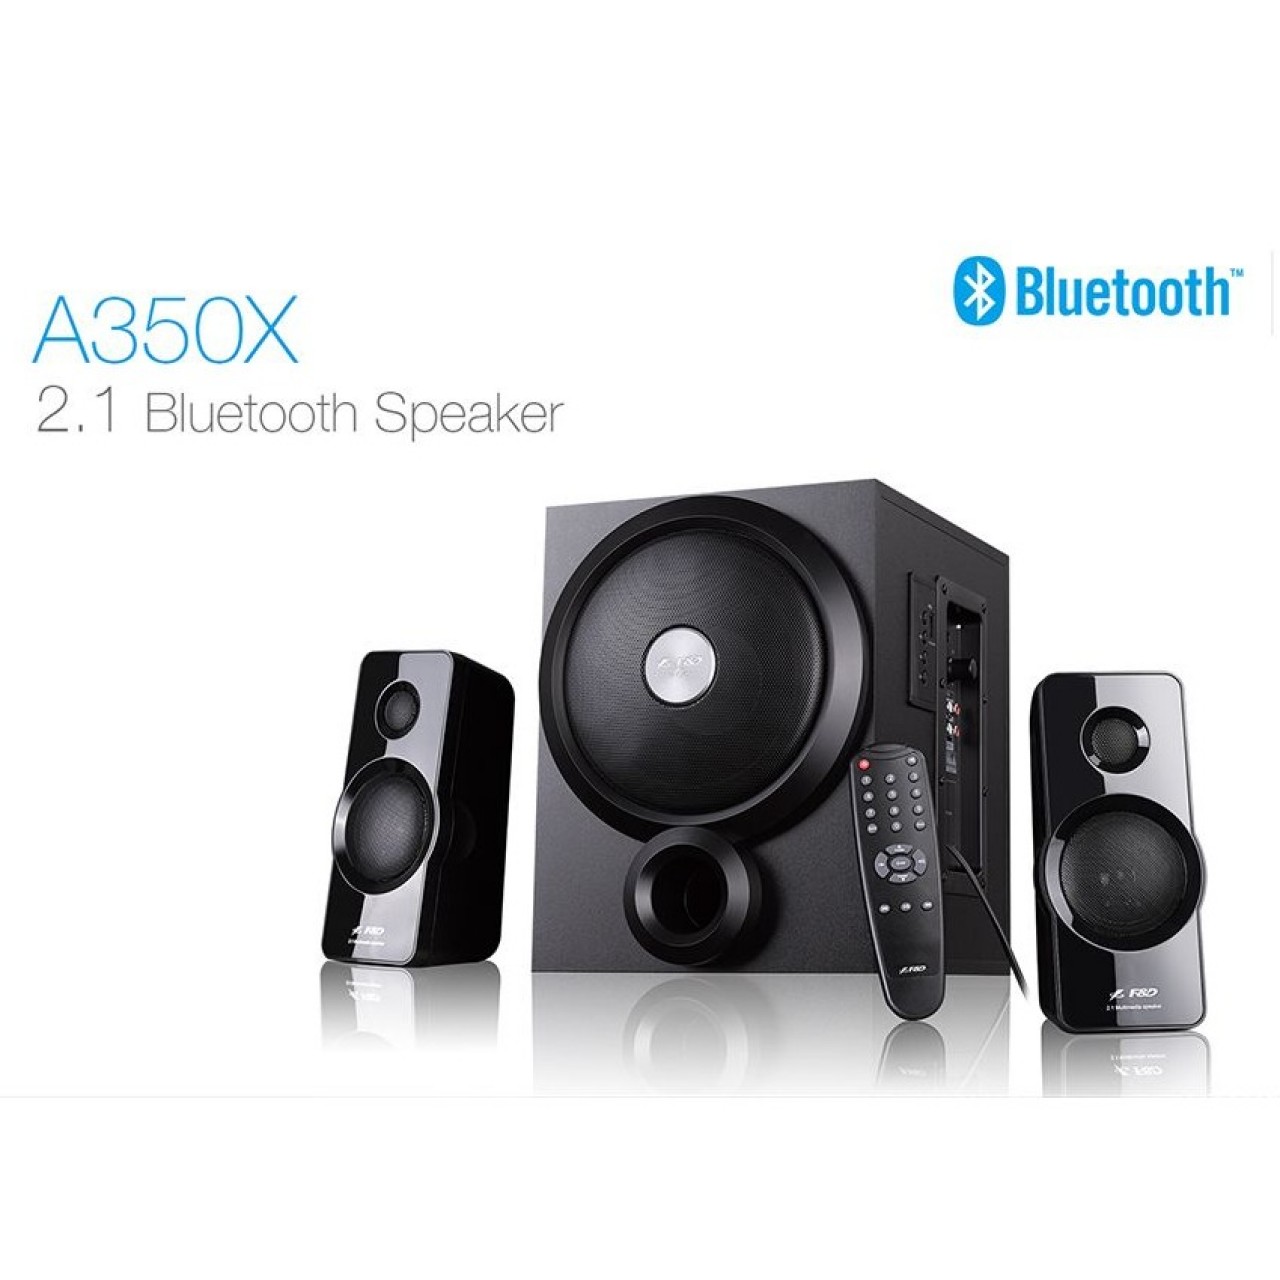 F&D A350x Bluetooth Multimedia Speaker with 2 Subwoofers